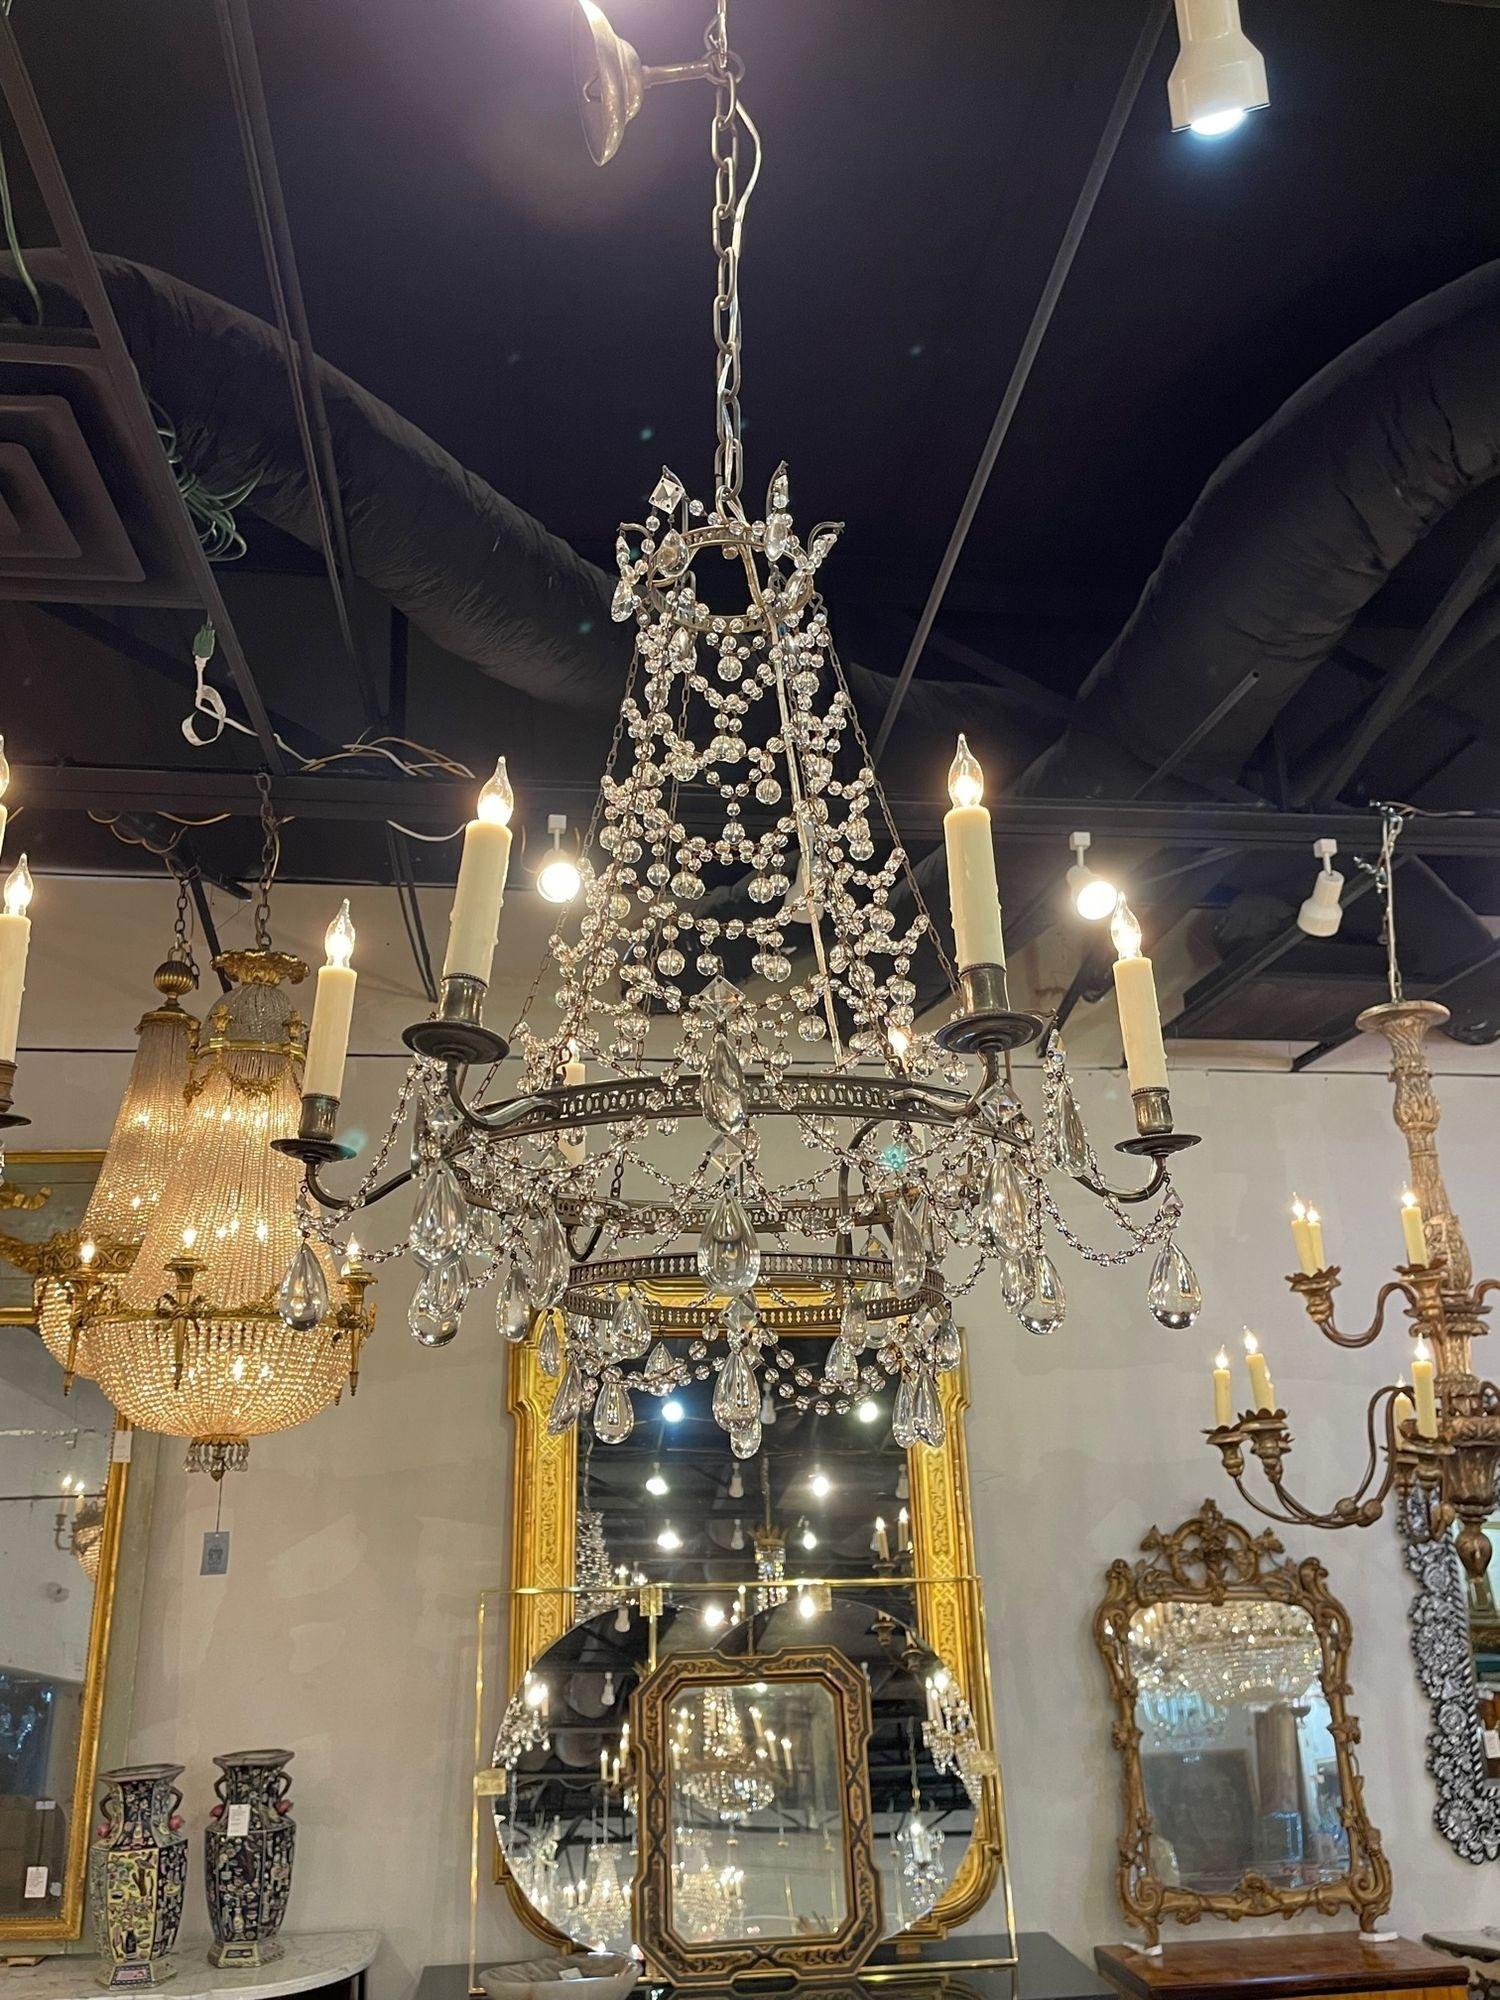 Beautiful vintage Italian beaded crystal chandelier with tear drops on a silvered base. A very nice fixture that is light and airy. Adds a touch of elegance!